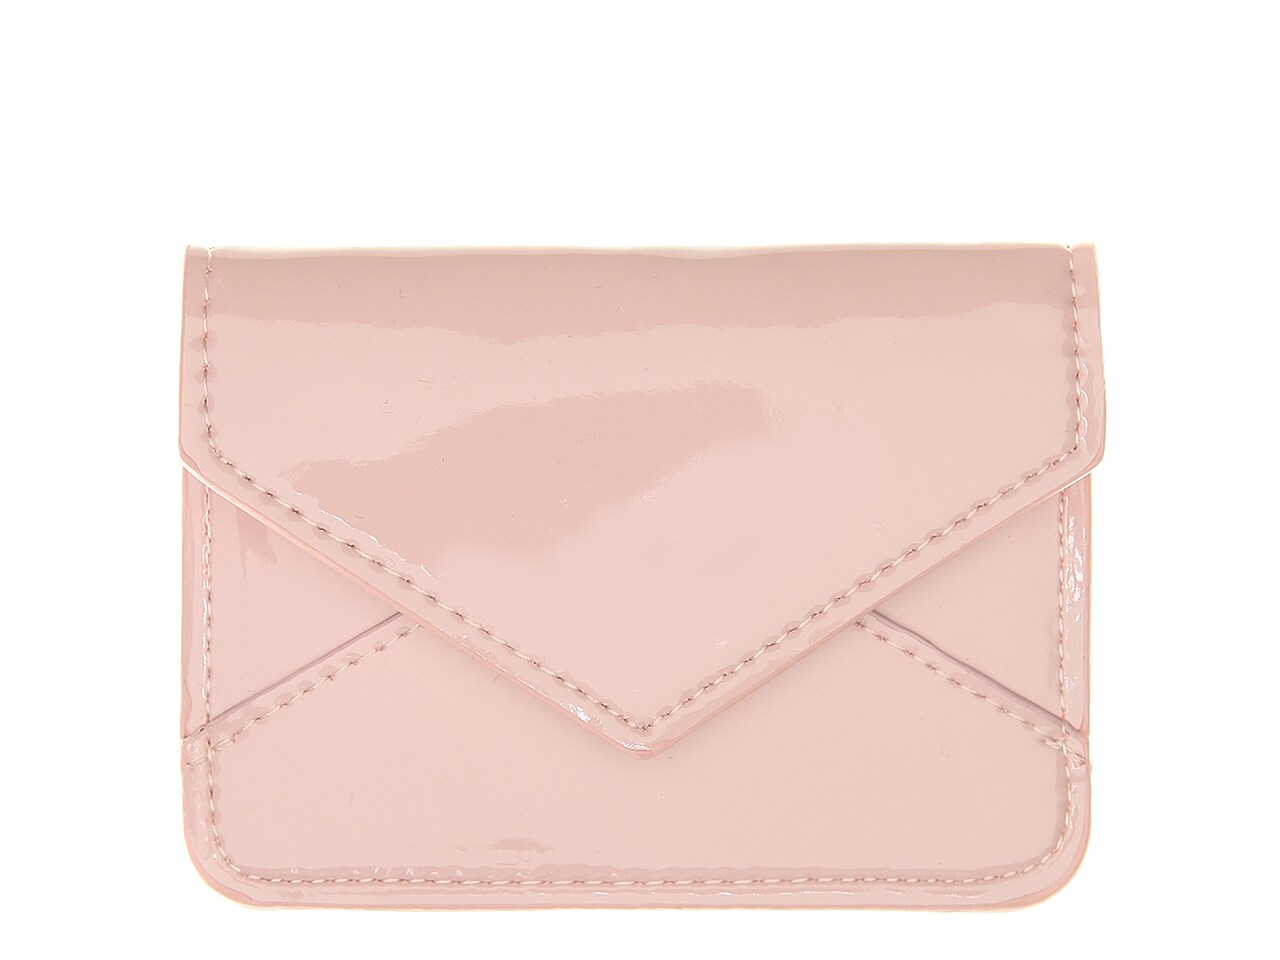 Urban Expressions Fifi Patent Wallet